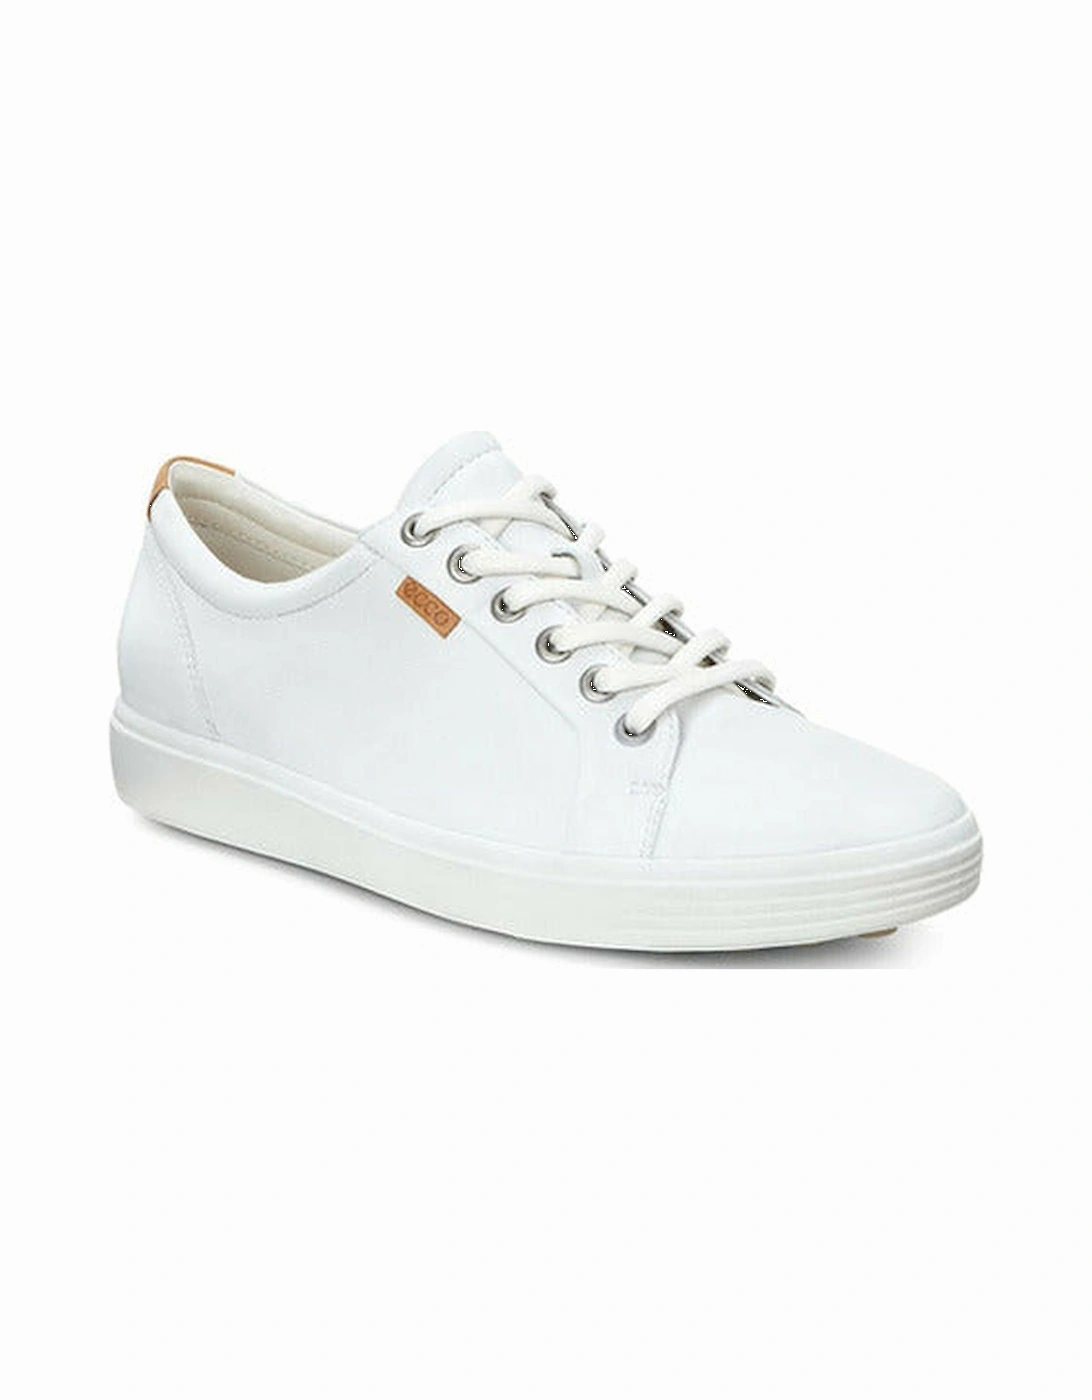 Soft 7 Ladies sneaker 430003 01007 white leather, 2 of 1